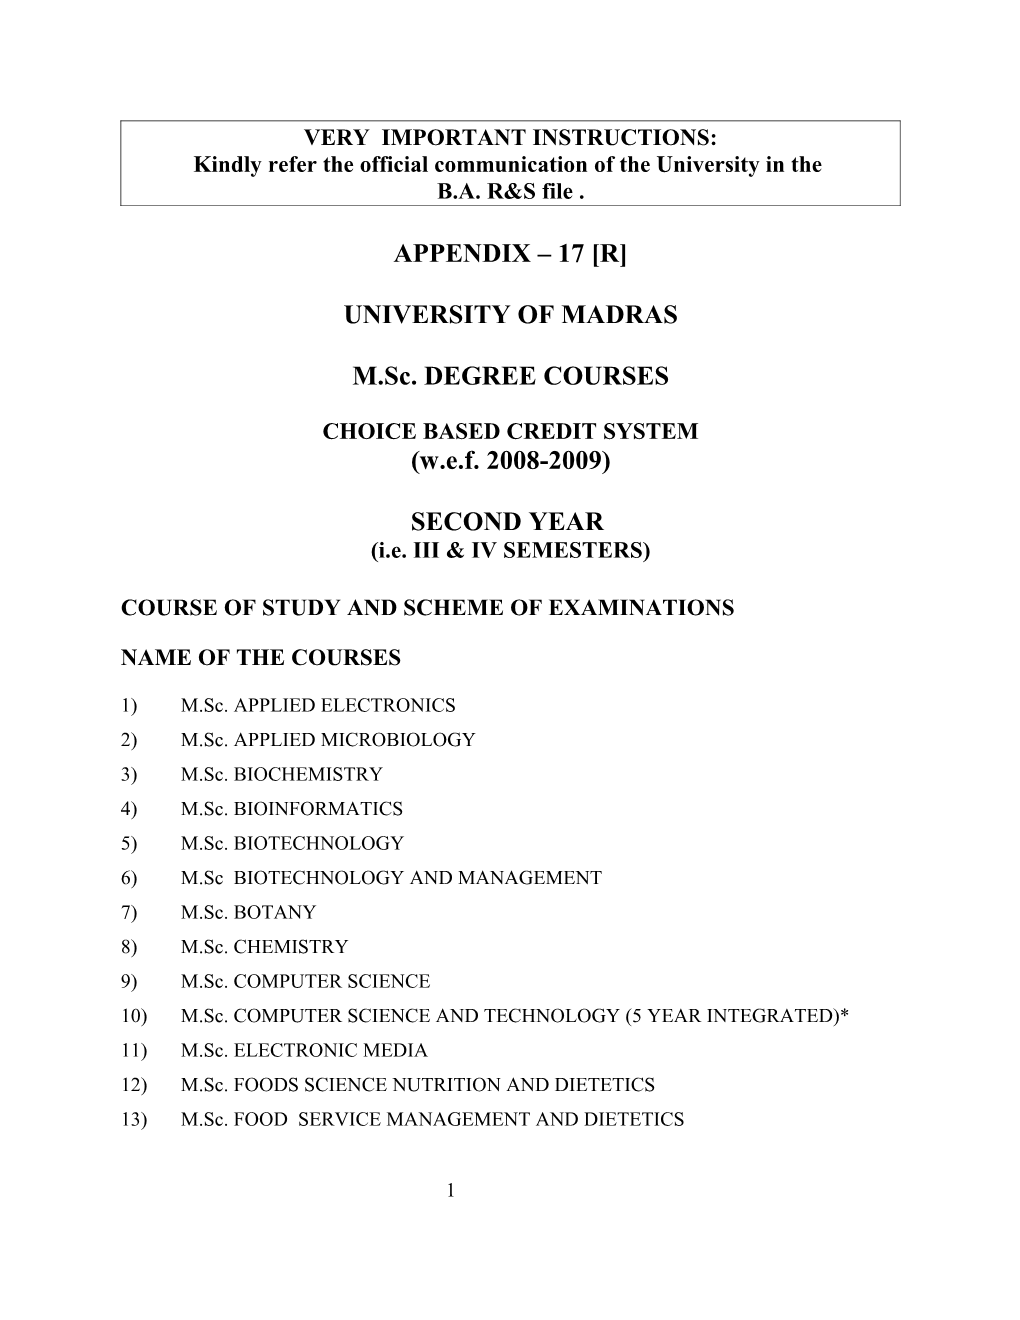 Kindly Refer the Official Communication of the University in The